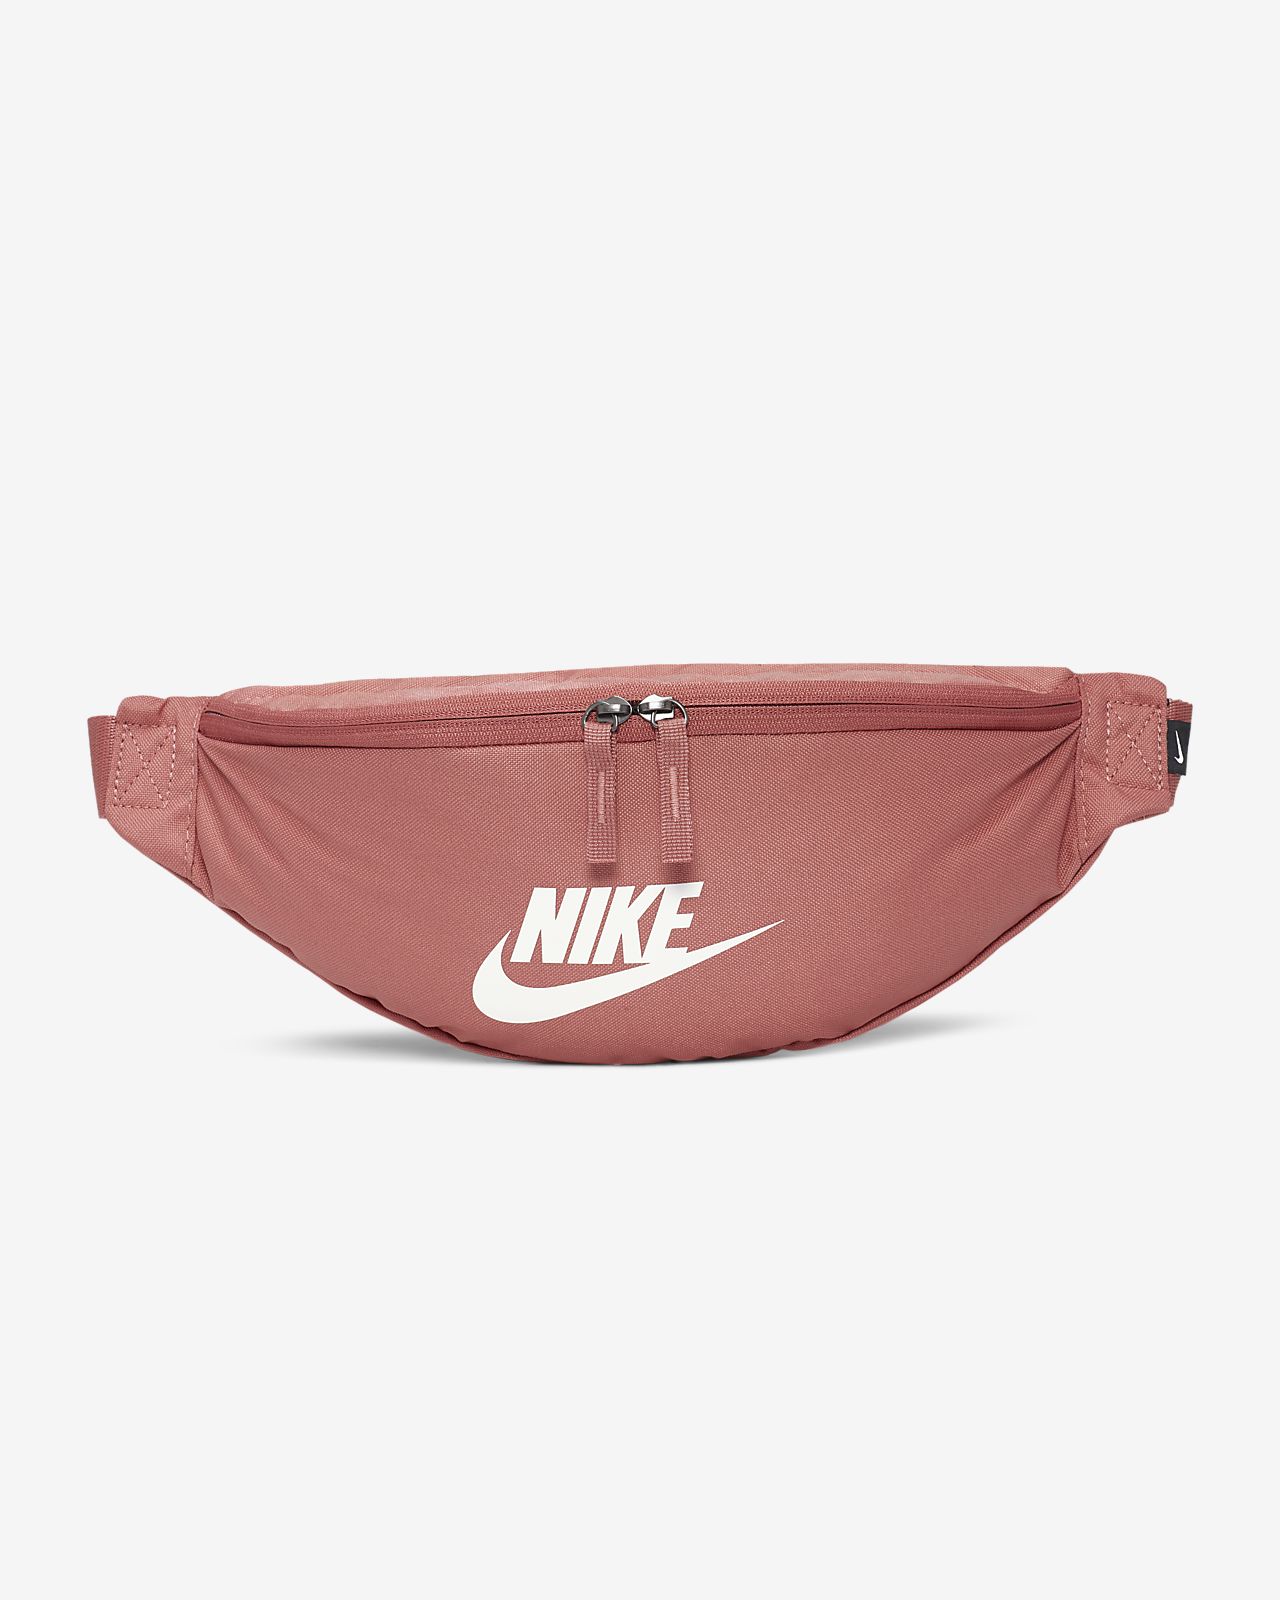 buy \u003e nike fanny pack pink, Up to 76% OFF